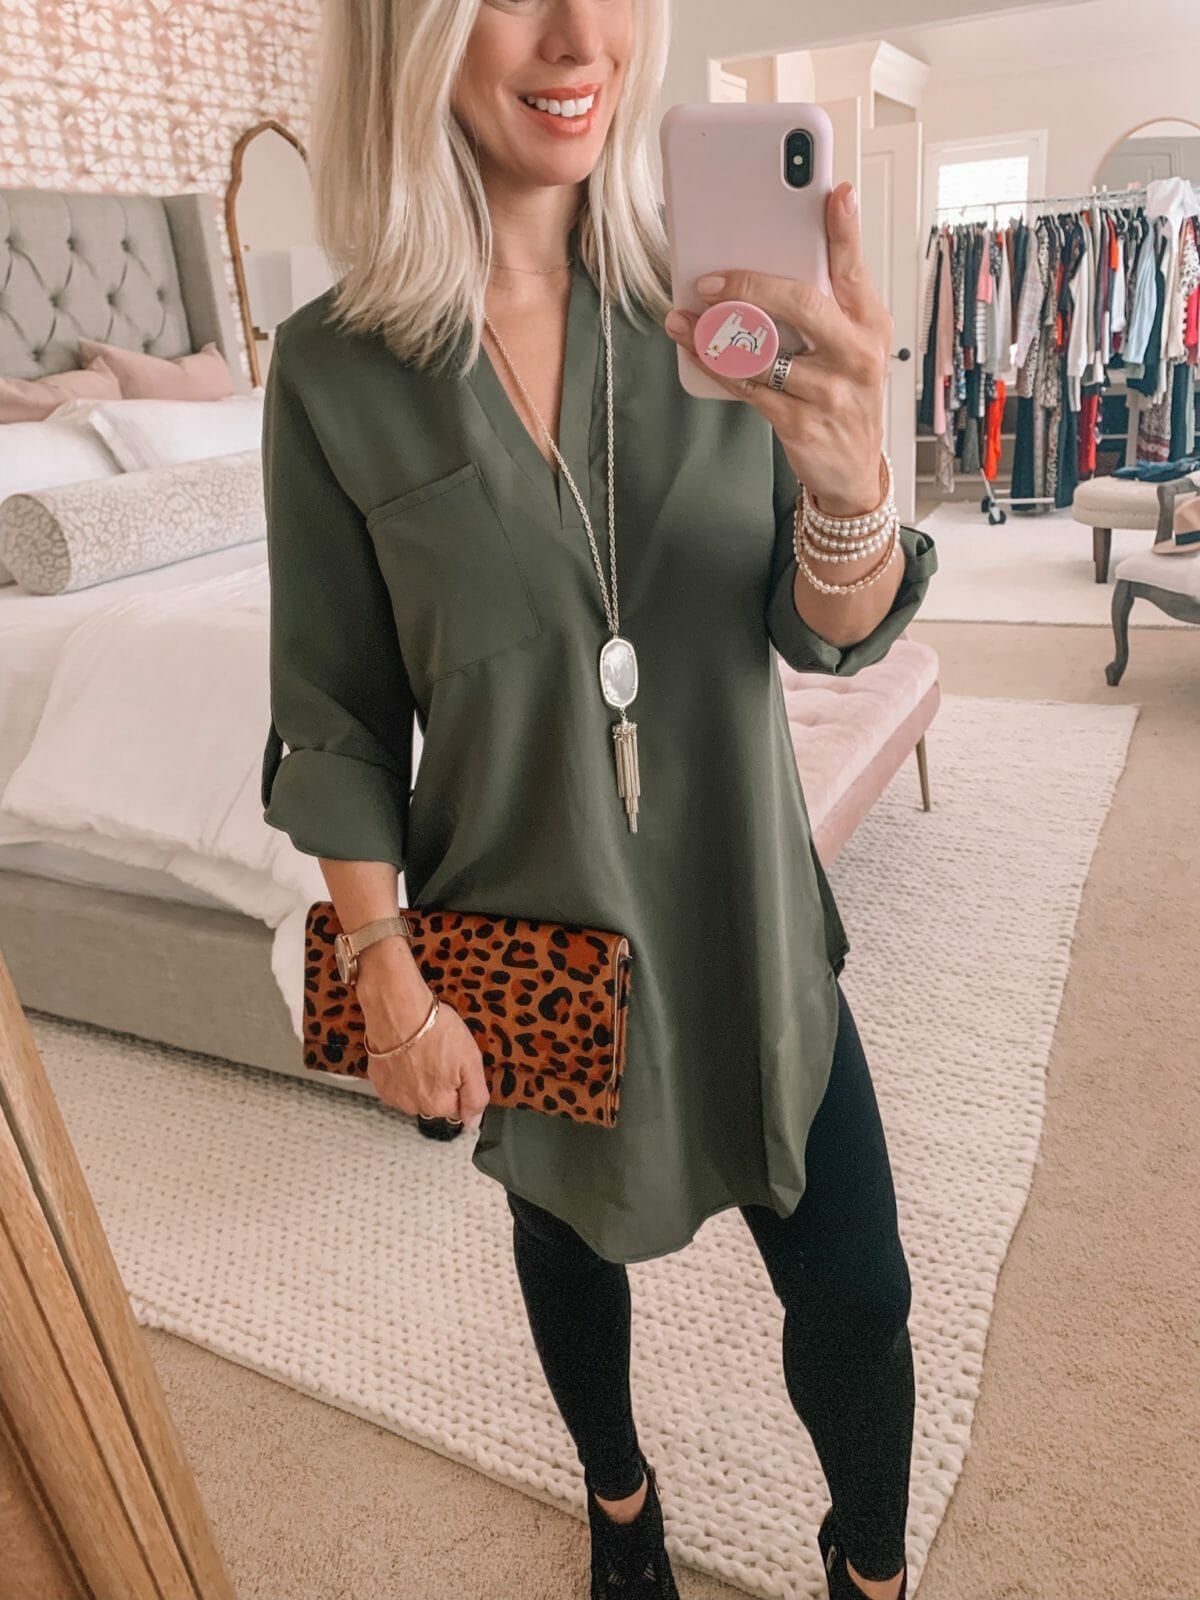 How to Style Green Tunic: Top 15 Refreshing Outfit Ideas for Women